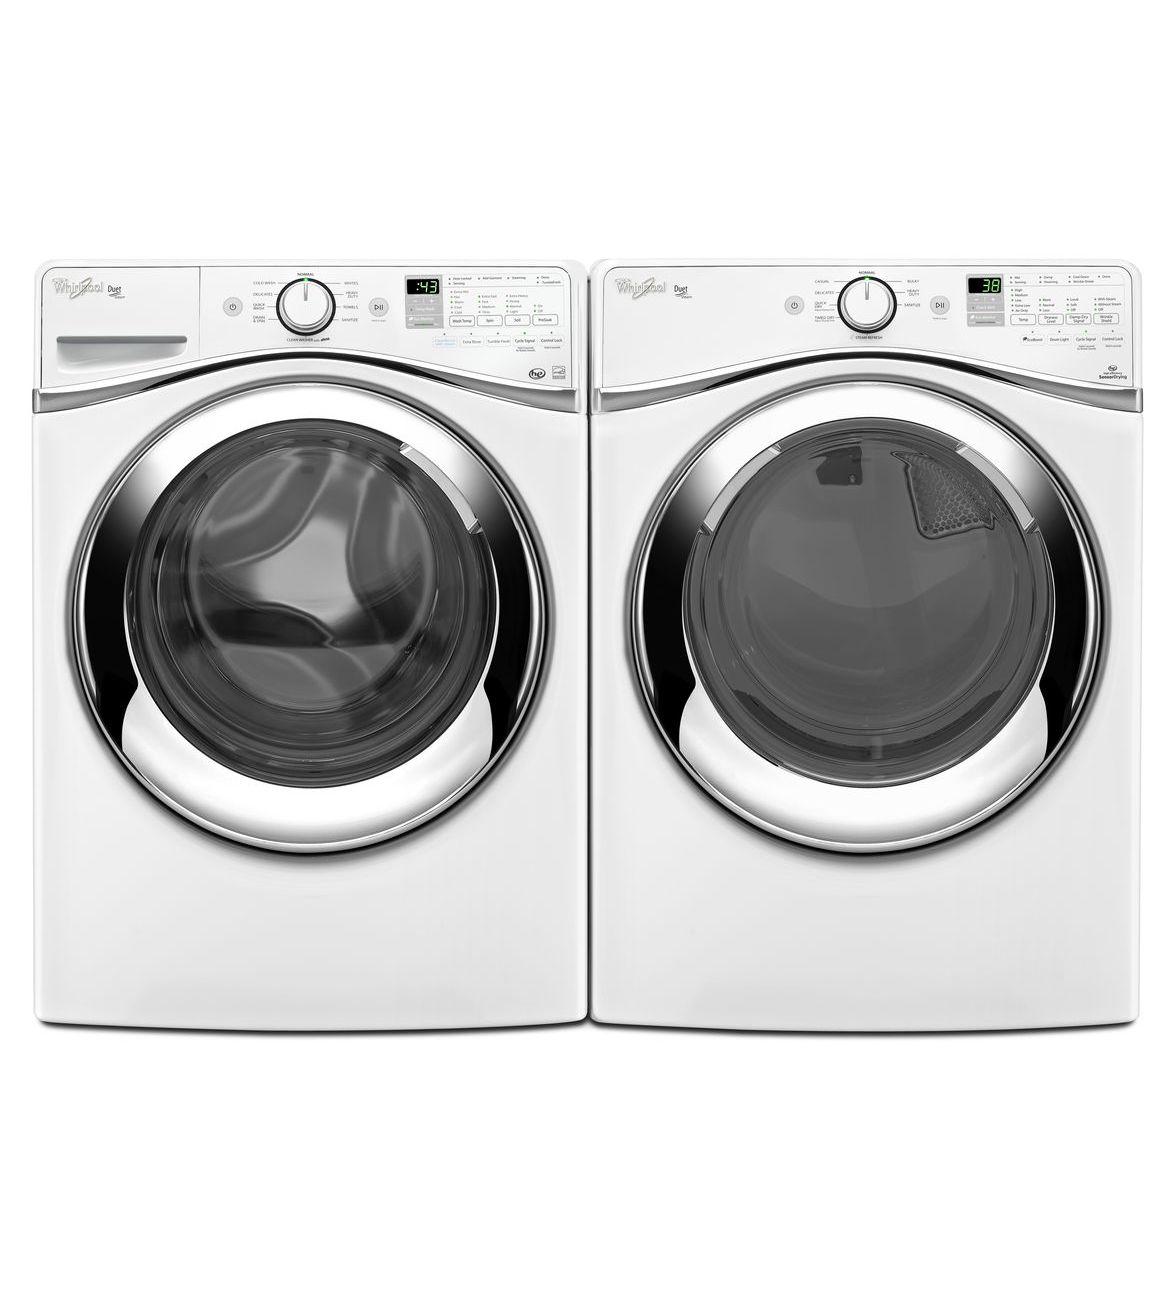 Whirlpool 7.3 cubic foot Duet front load electric steam dryer for $539